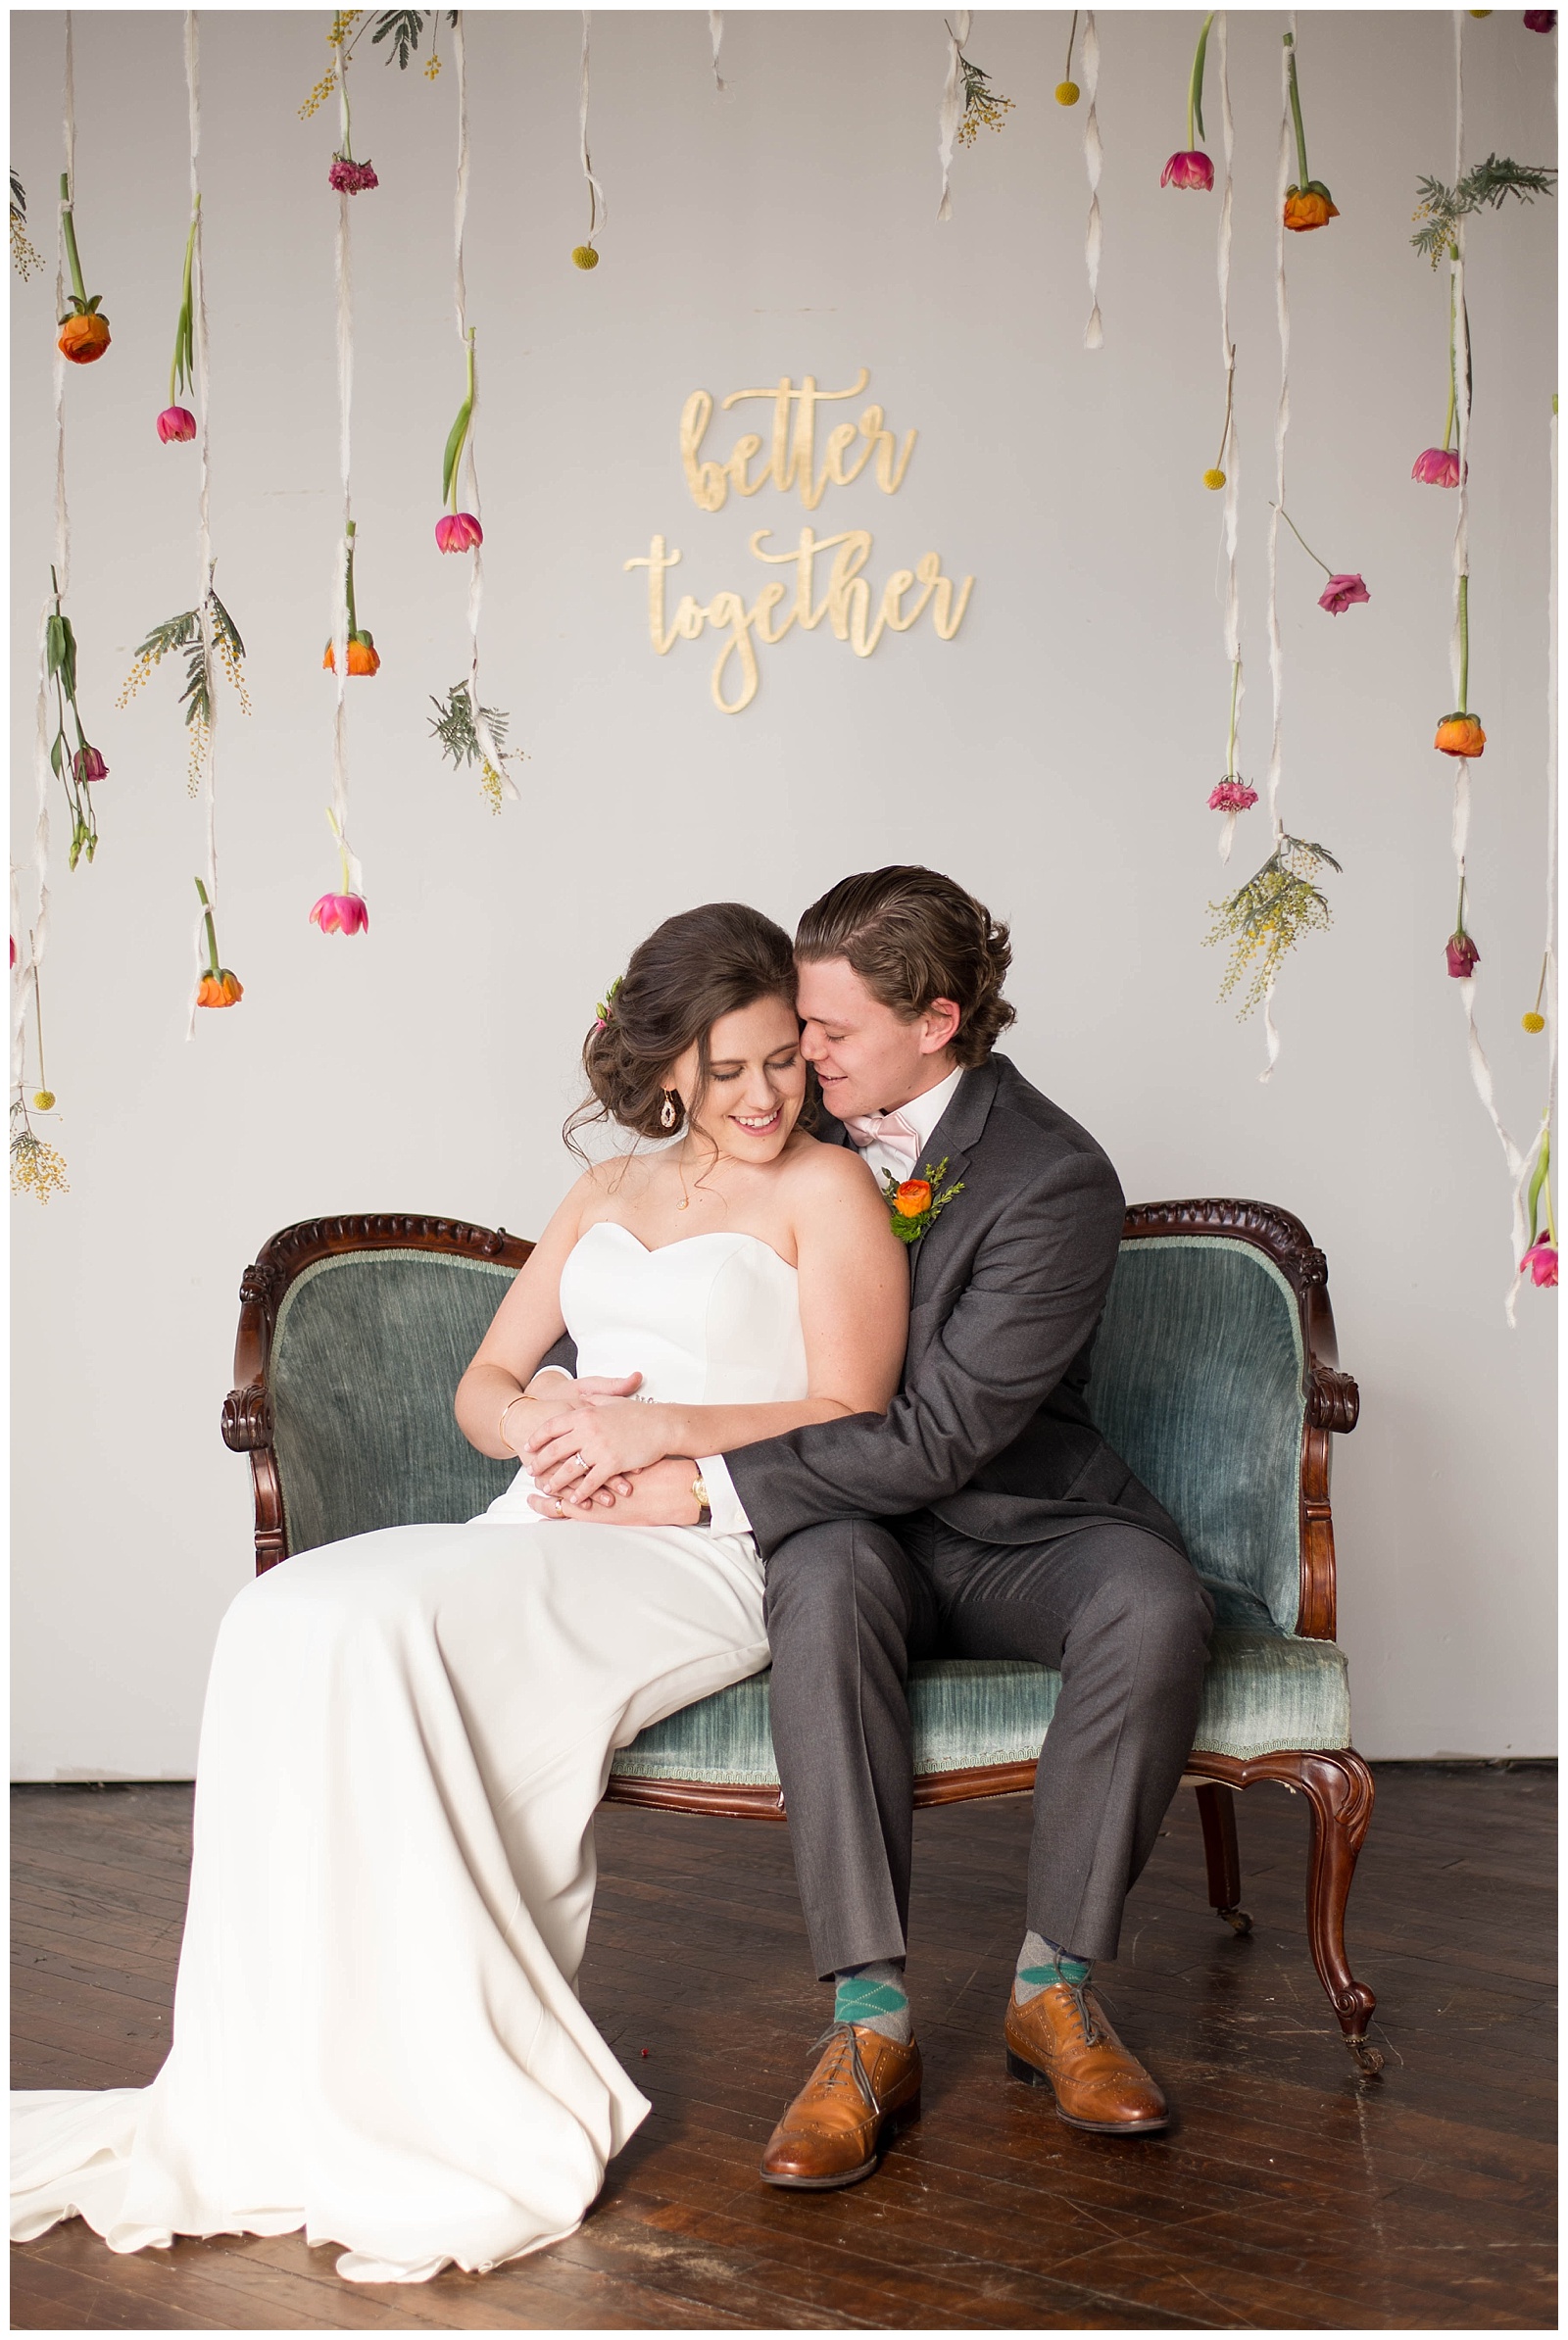 Bride and Groom, Spring Wedding | Monica Brown Photography monicabrownphoto.com